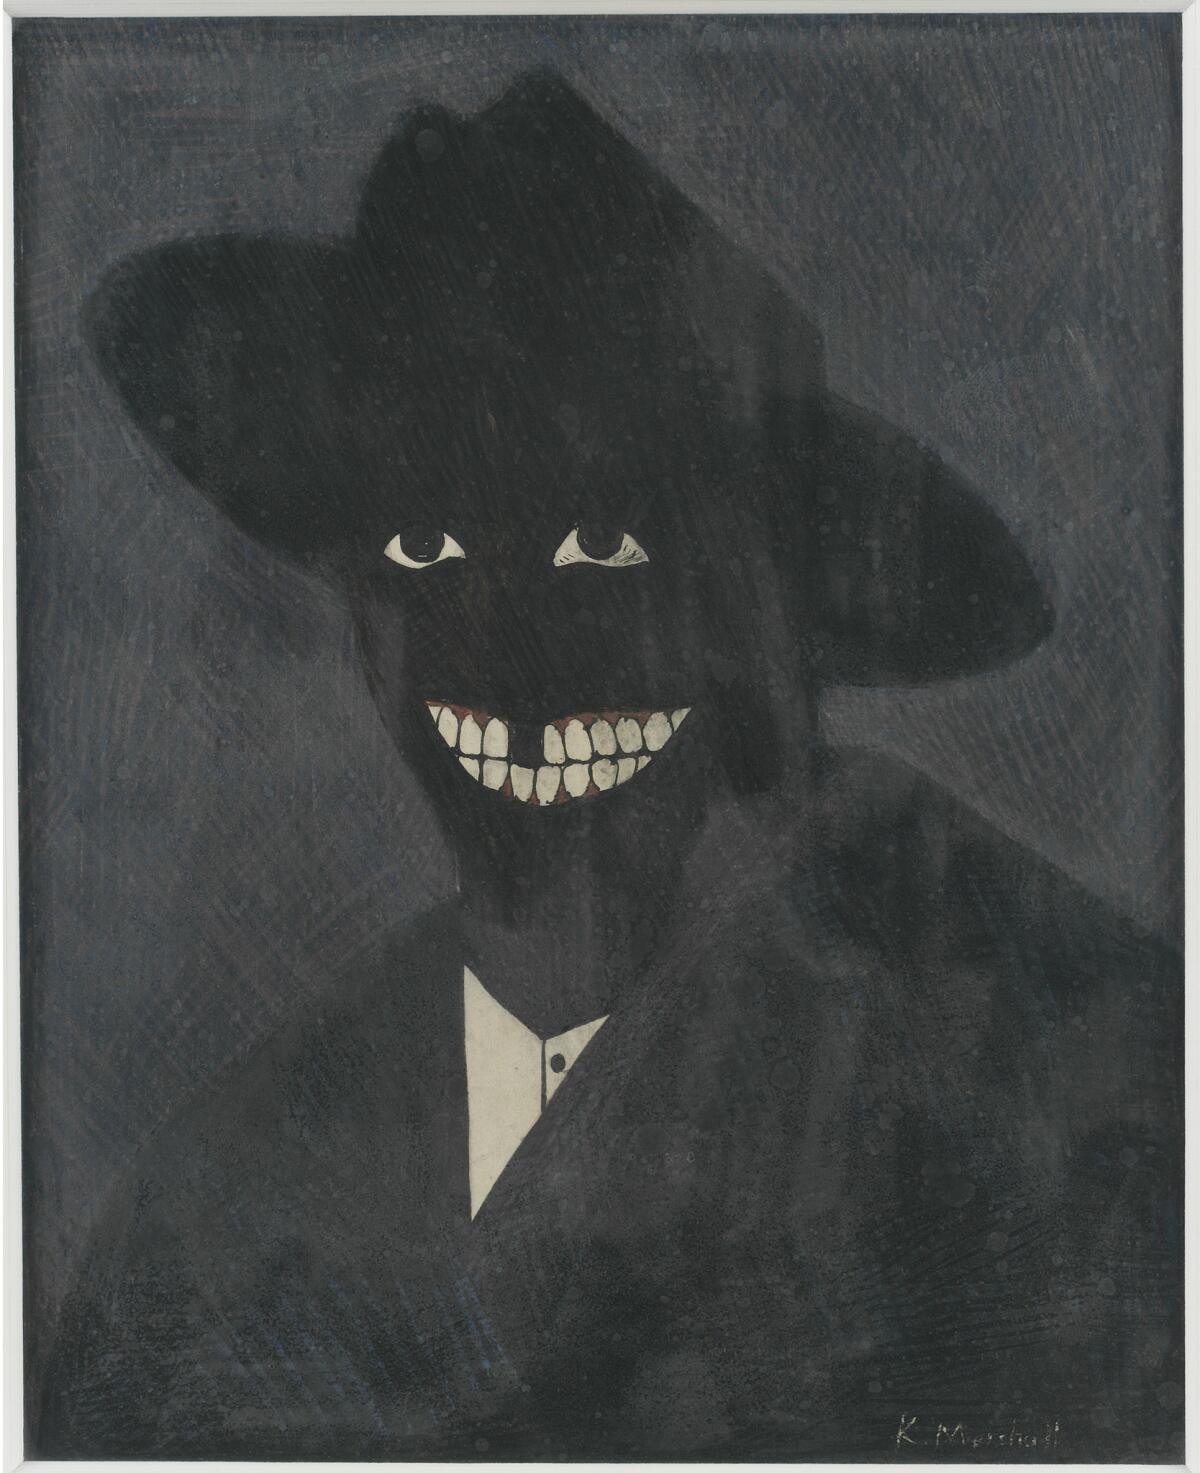 Kerry James Marshall, "A Portrait of the Artist as a Shadow of His Former Self," 1980, egg tempera on paper (MOCA)